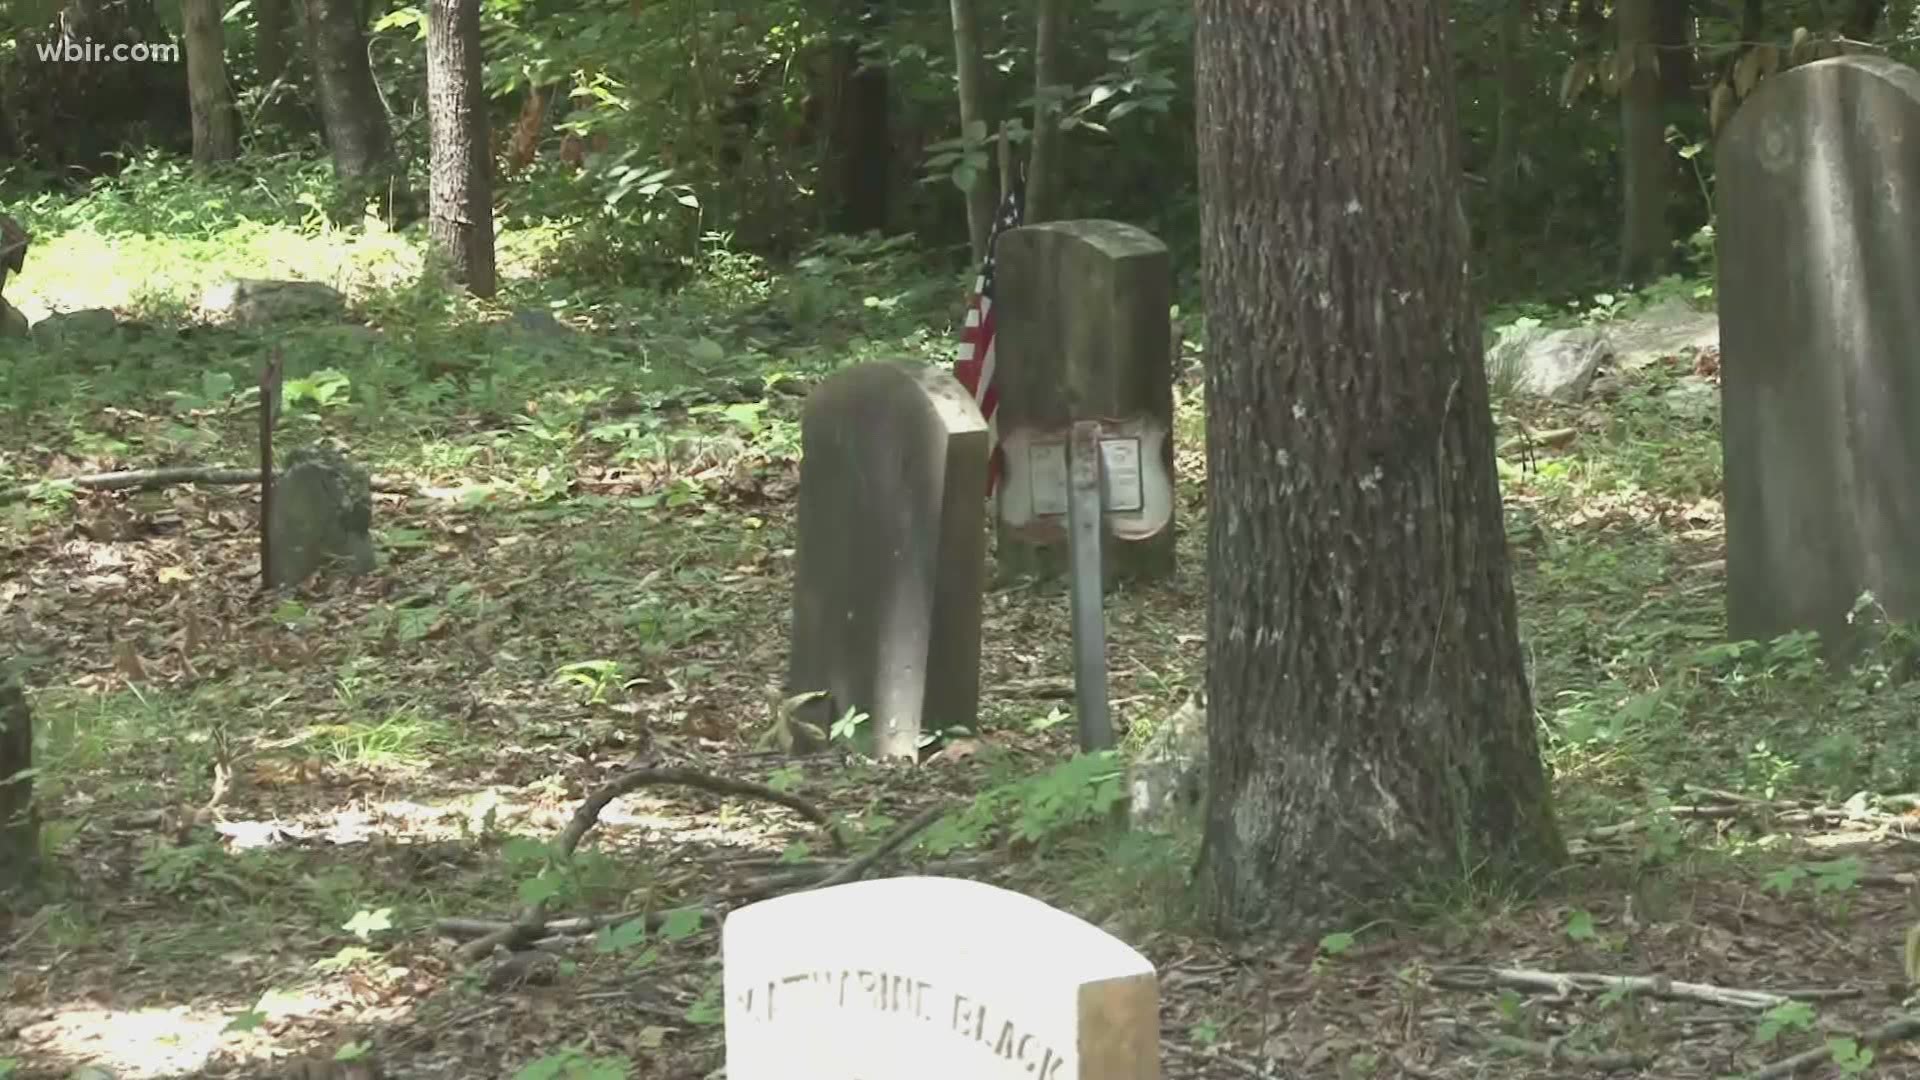 A neglected Anderson County cemetery is now open to the public after a local historian spent years cleaning it up.